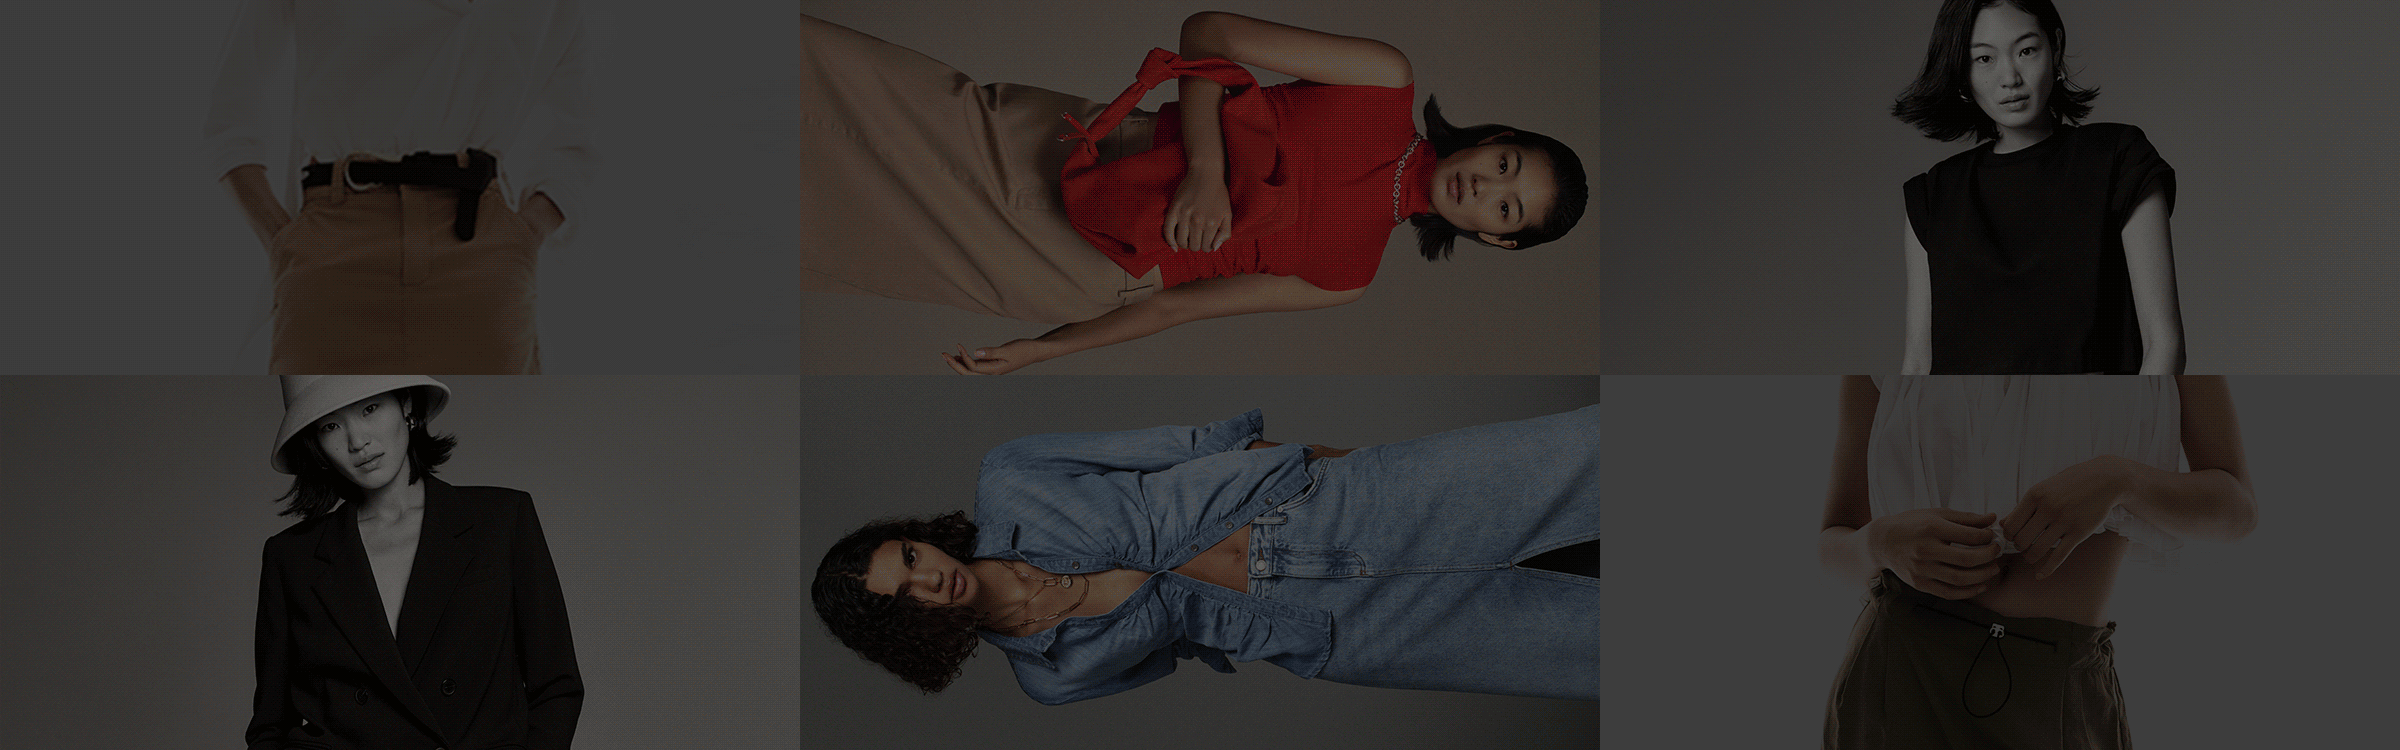 This New Spring Collection Is Giving '90s Minimalism, and We're All About It